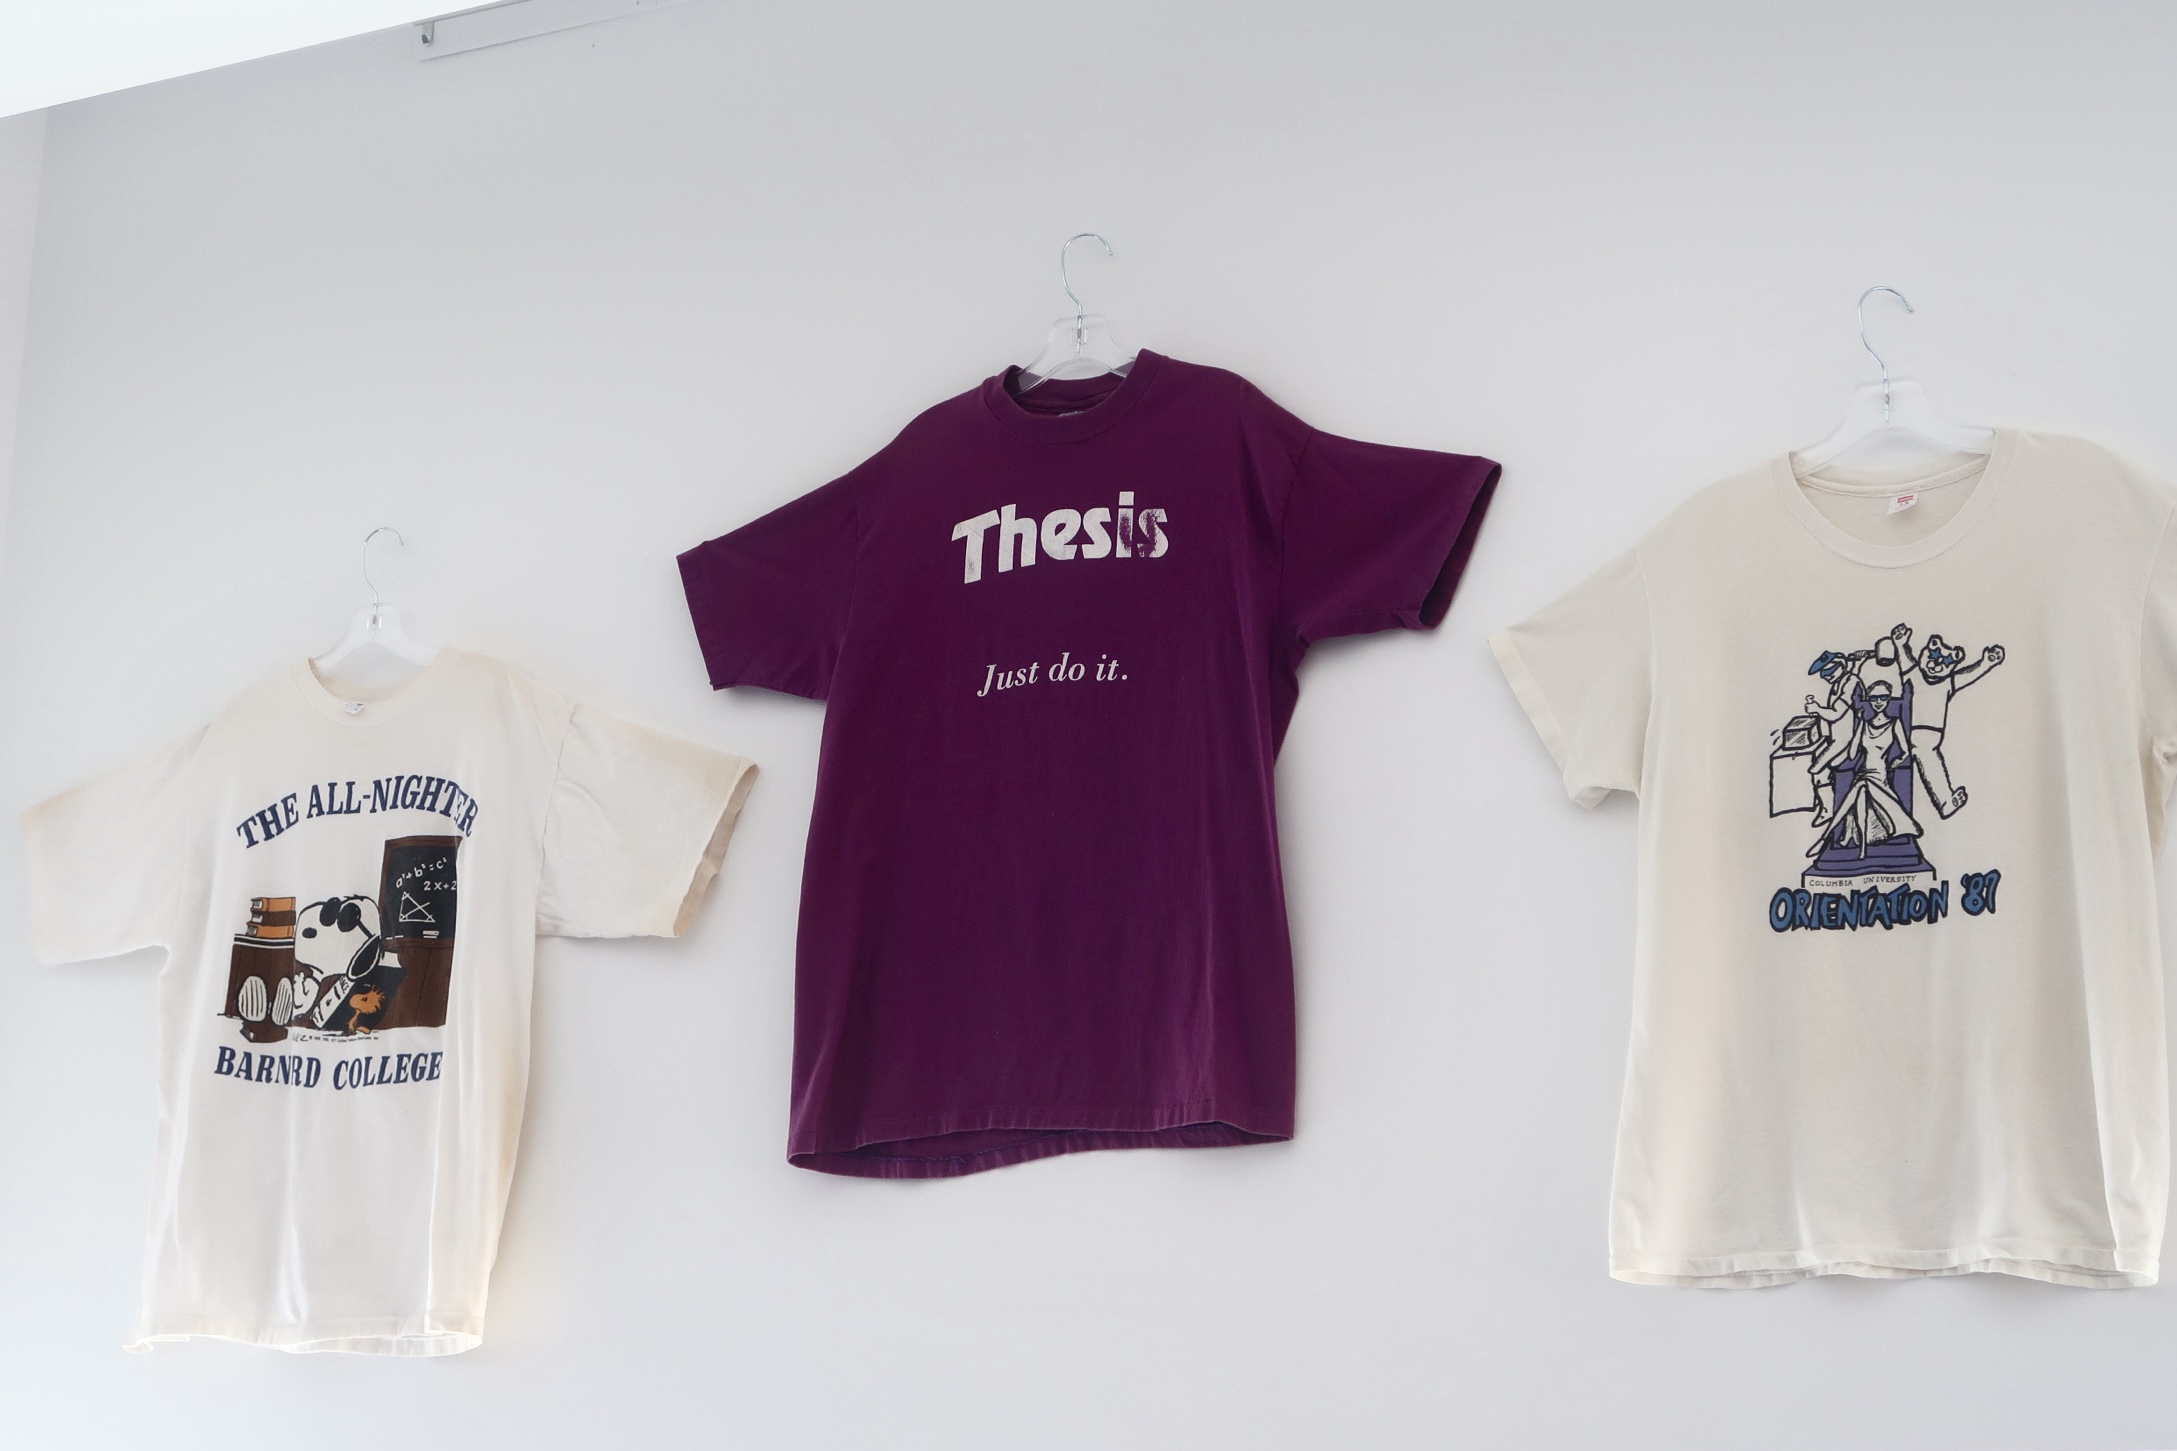 Shirts hanging in the archives reading room